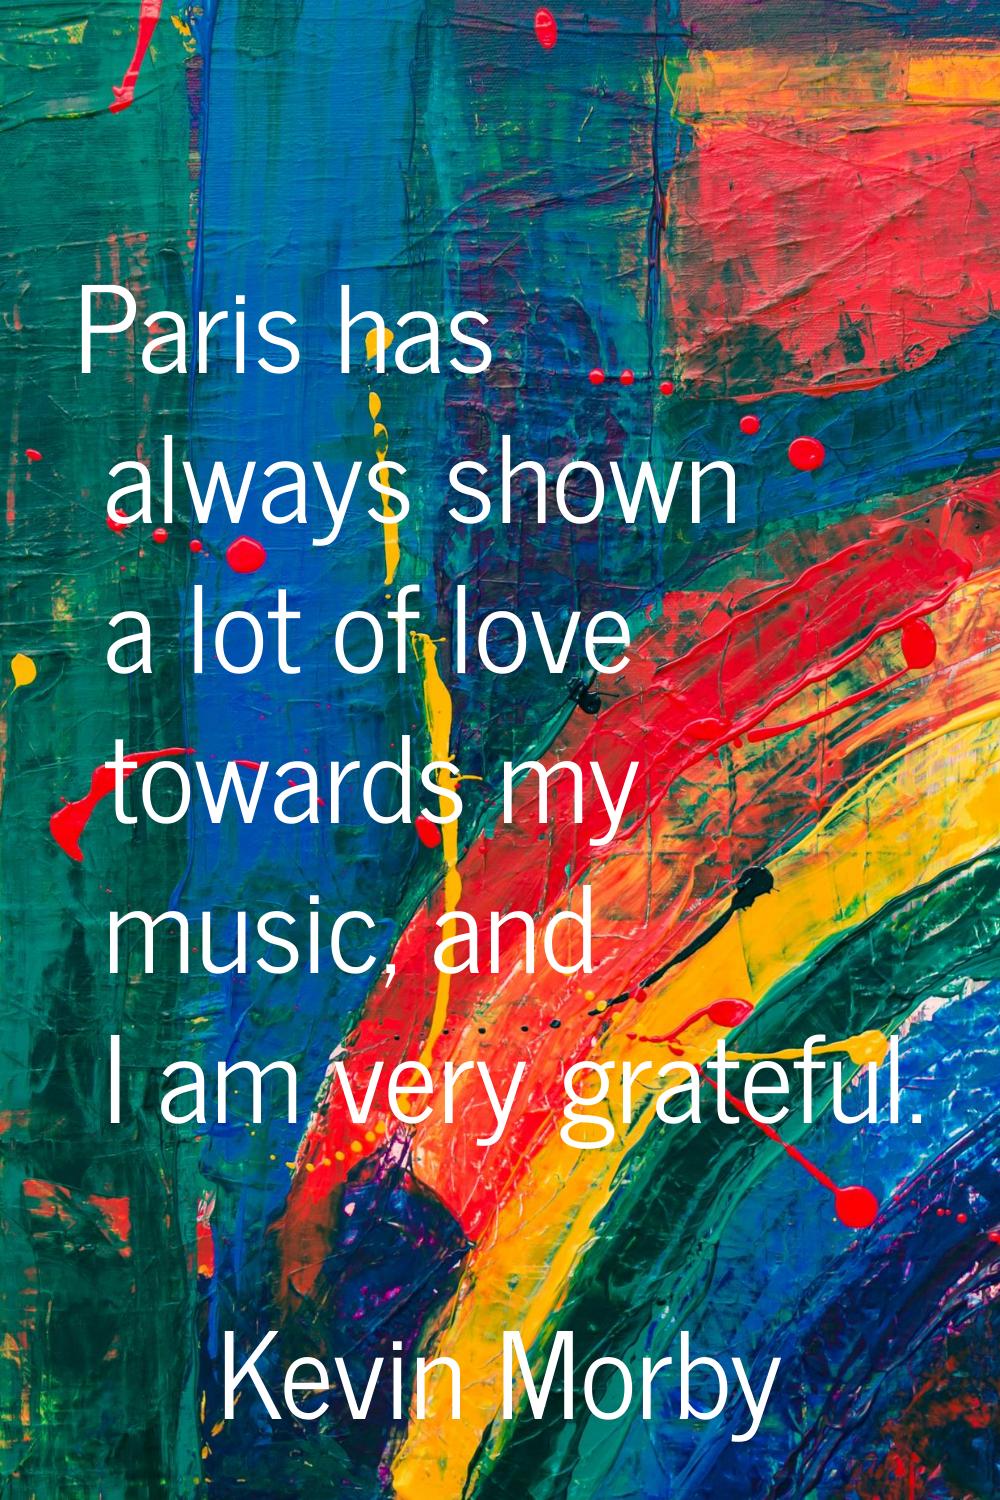 Paris has always shown a lot of love towards my music, and I am very grateful.